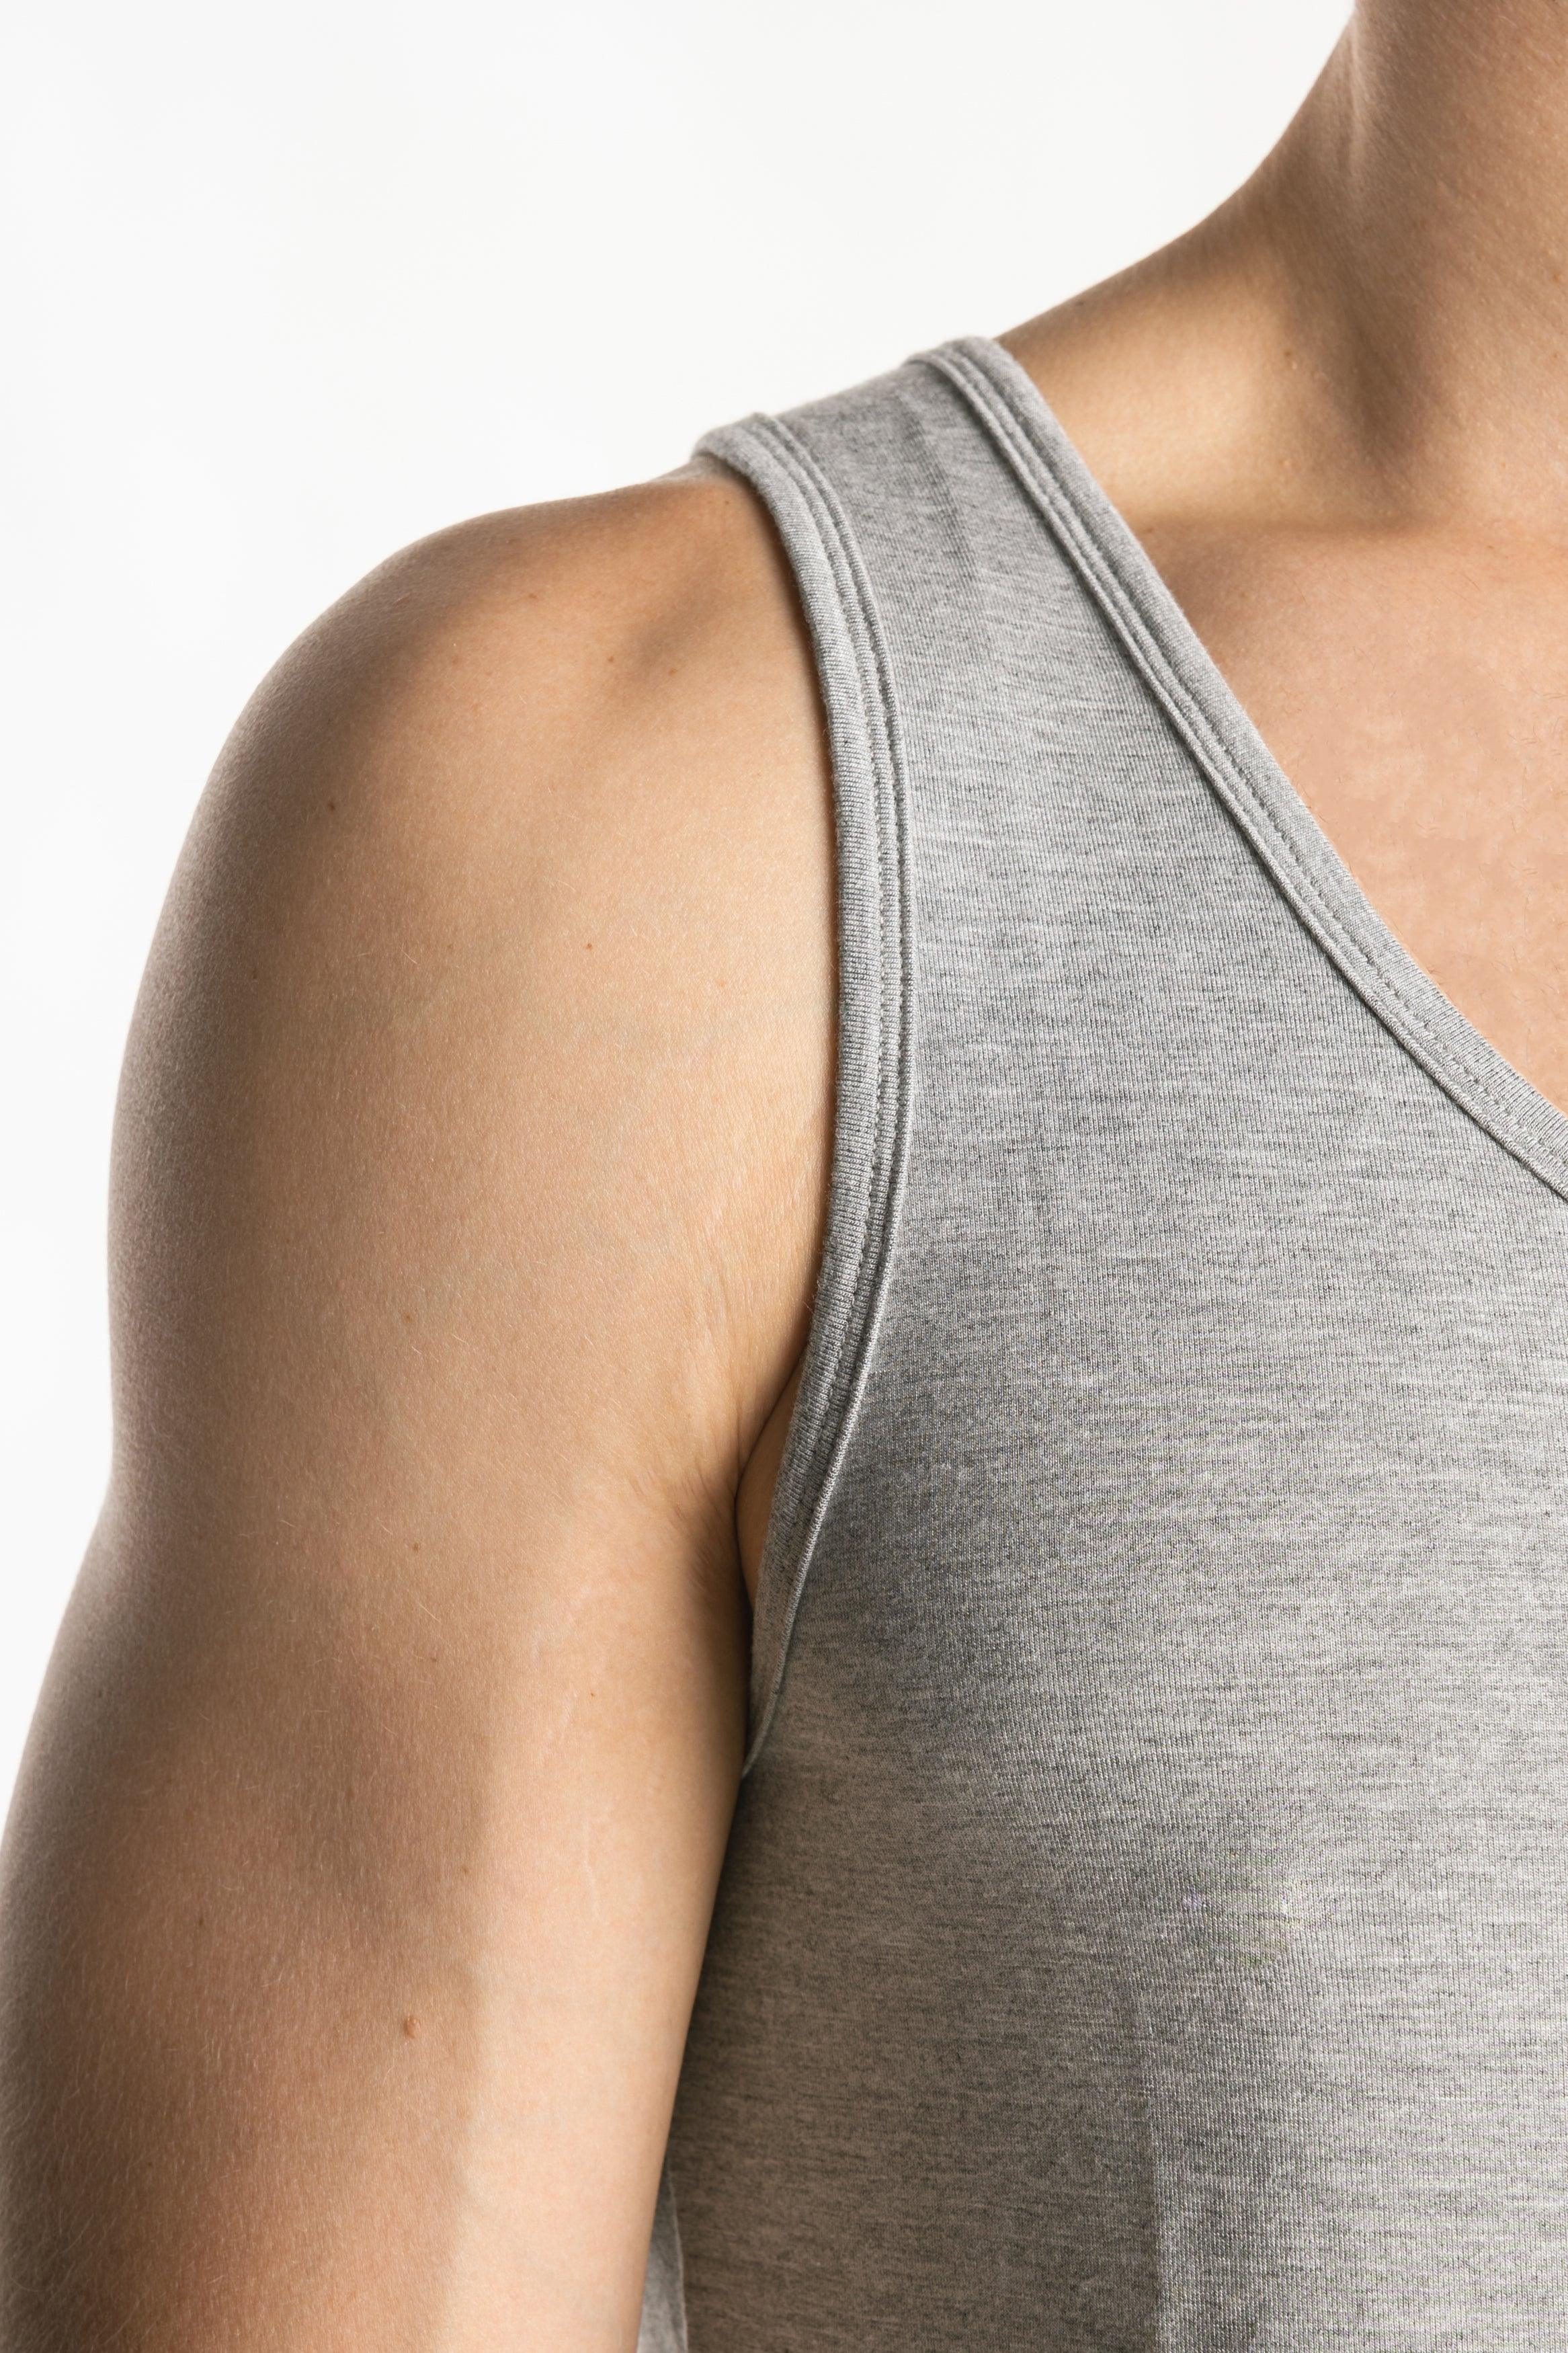 Men&#39;s Sustainable Tank Top - NOT LABELED